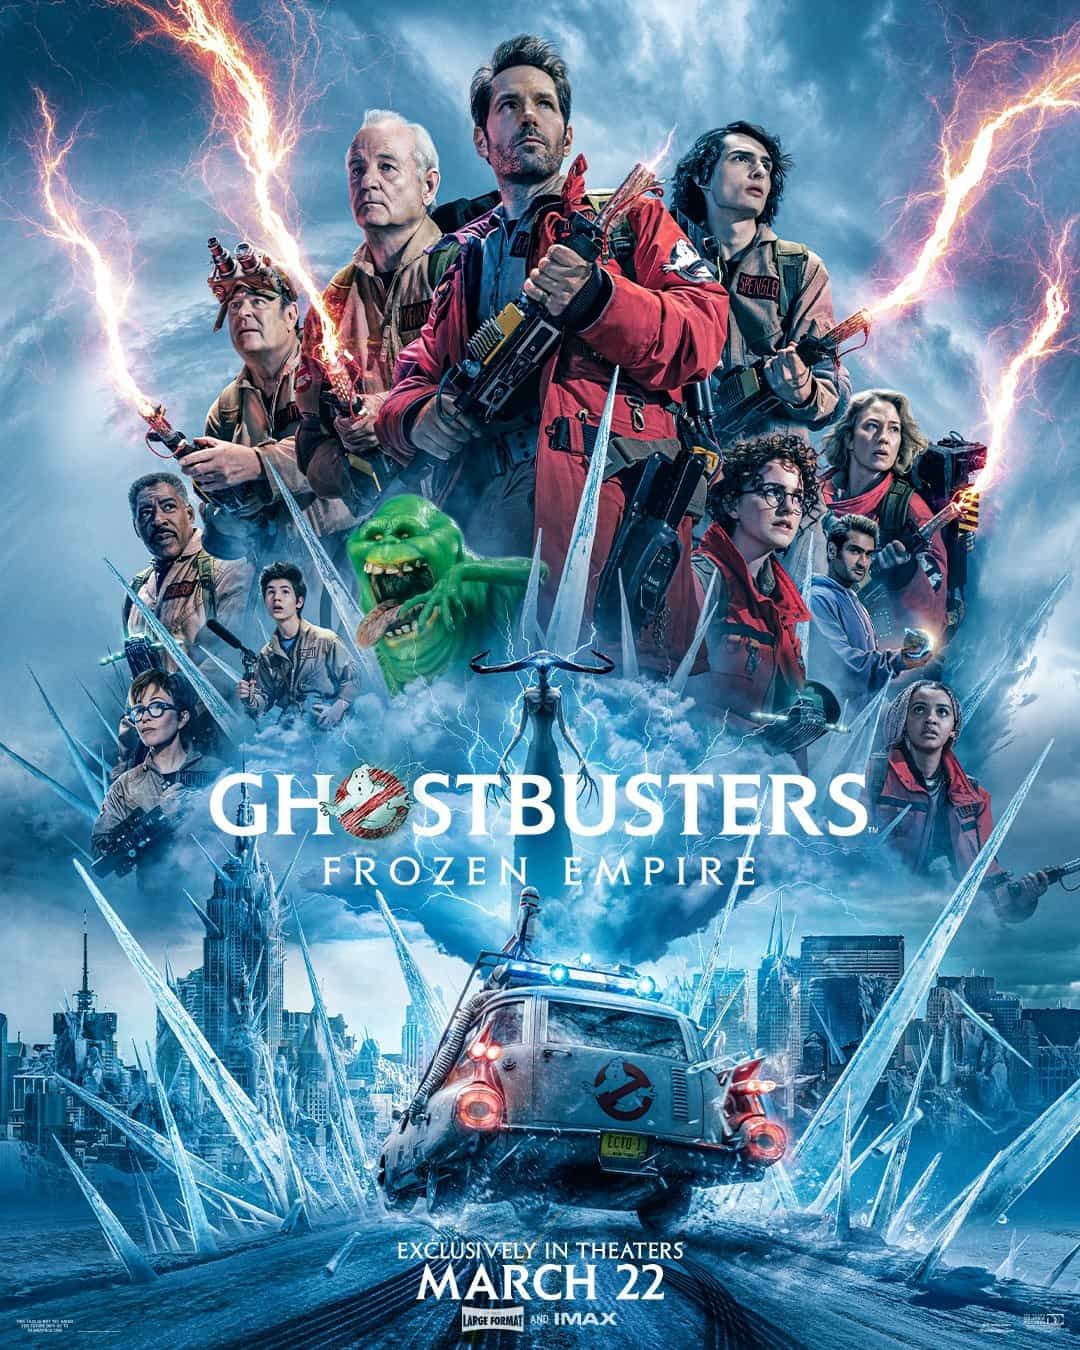 Check out first teaser trailer for upcoming movie Ghostbusters: Frozen Empire which stars Mckenna Grace and Paul Rudd - movie UK release date 29th March 2024 #ghostbustersfrozenempire